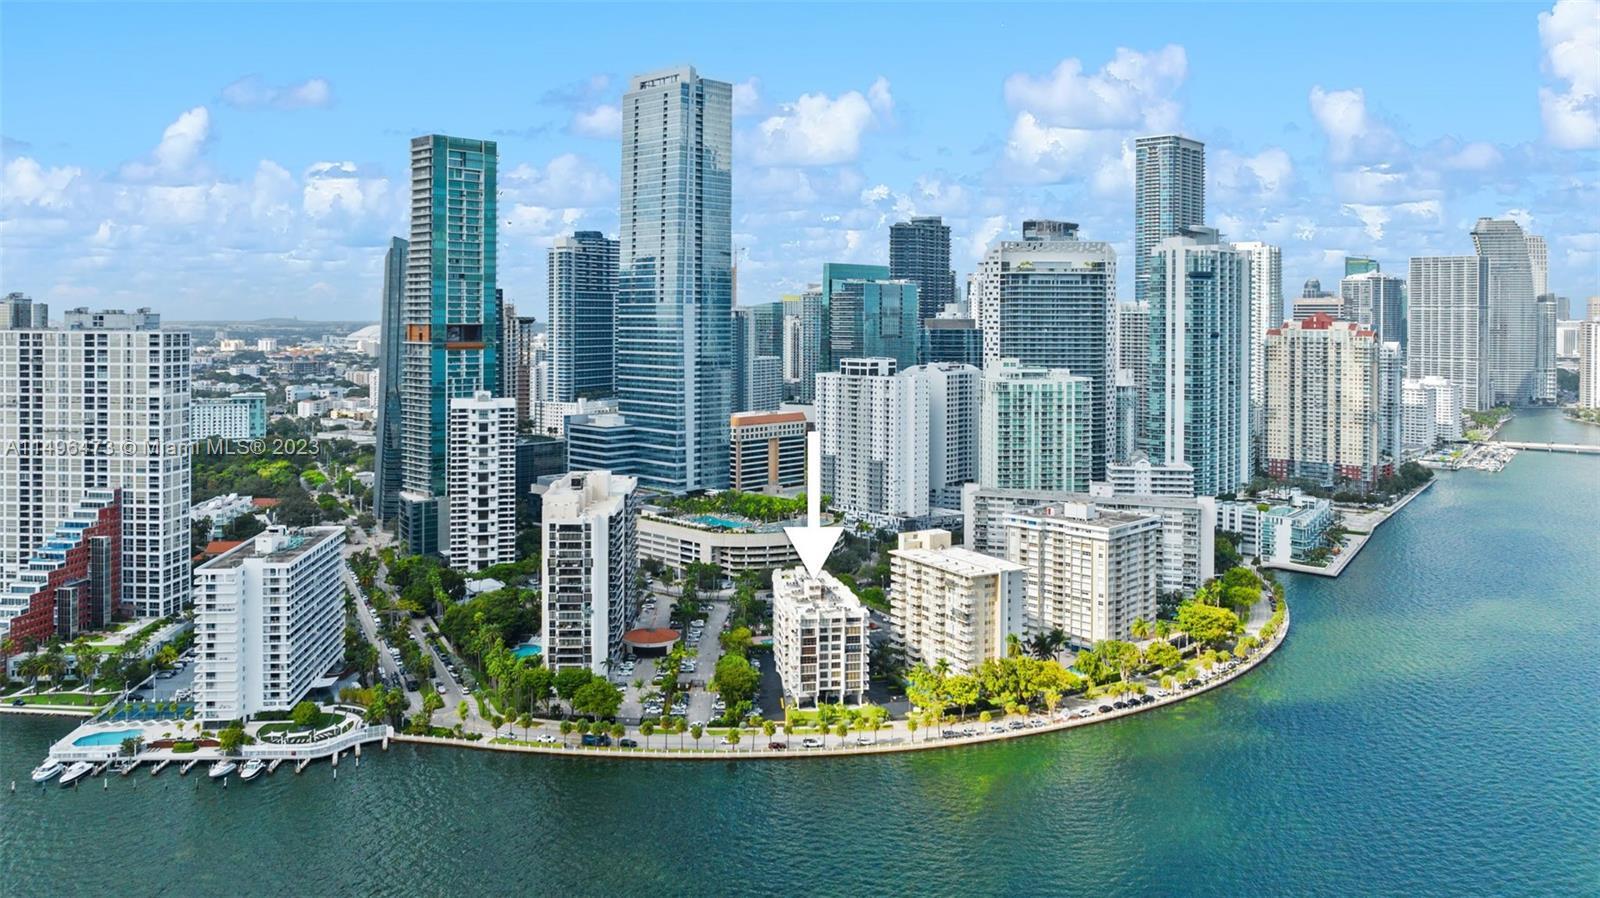 This exquisite condo awaits you in the coveted Brickell Bay Shores, nestled within a charming boutiq